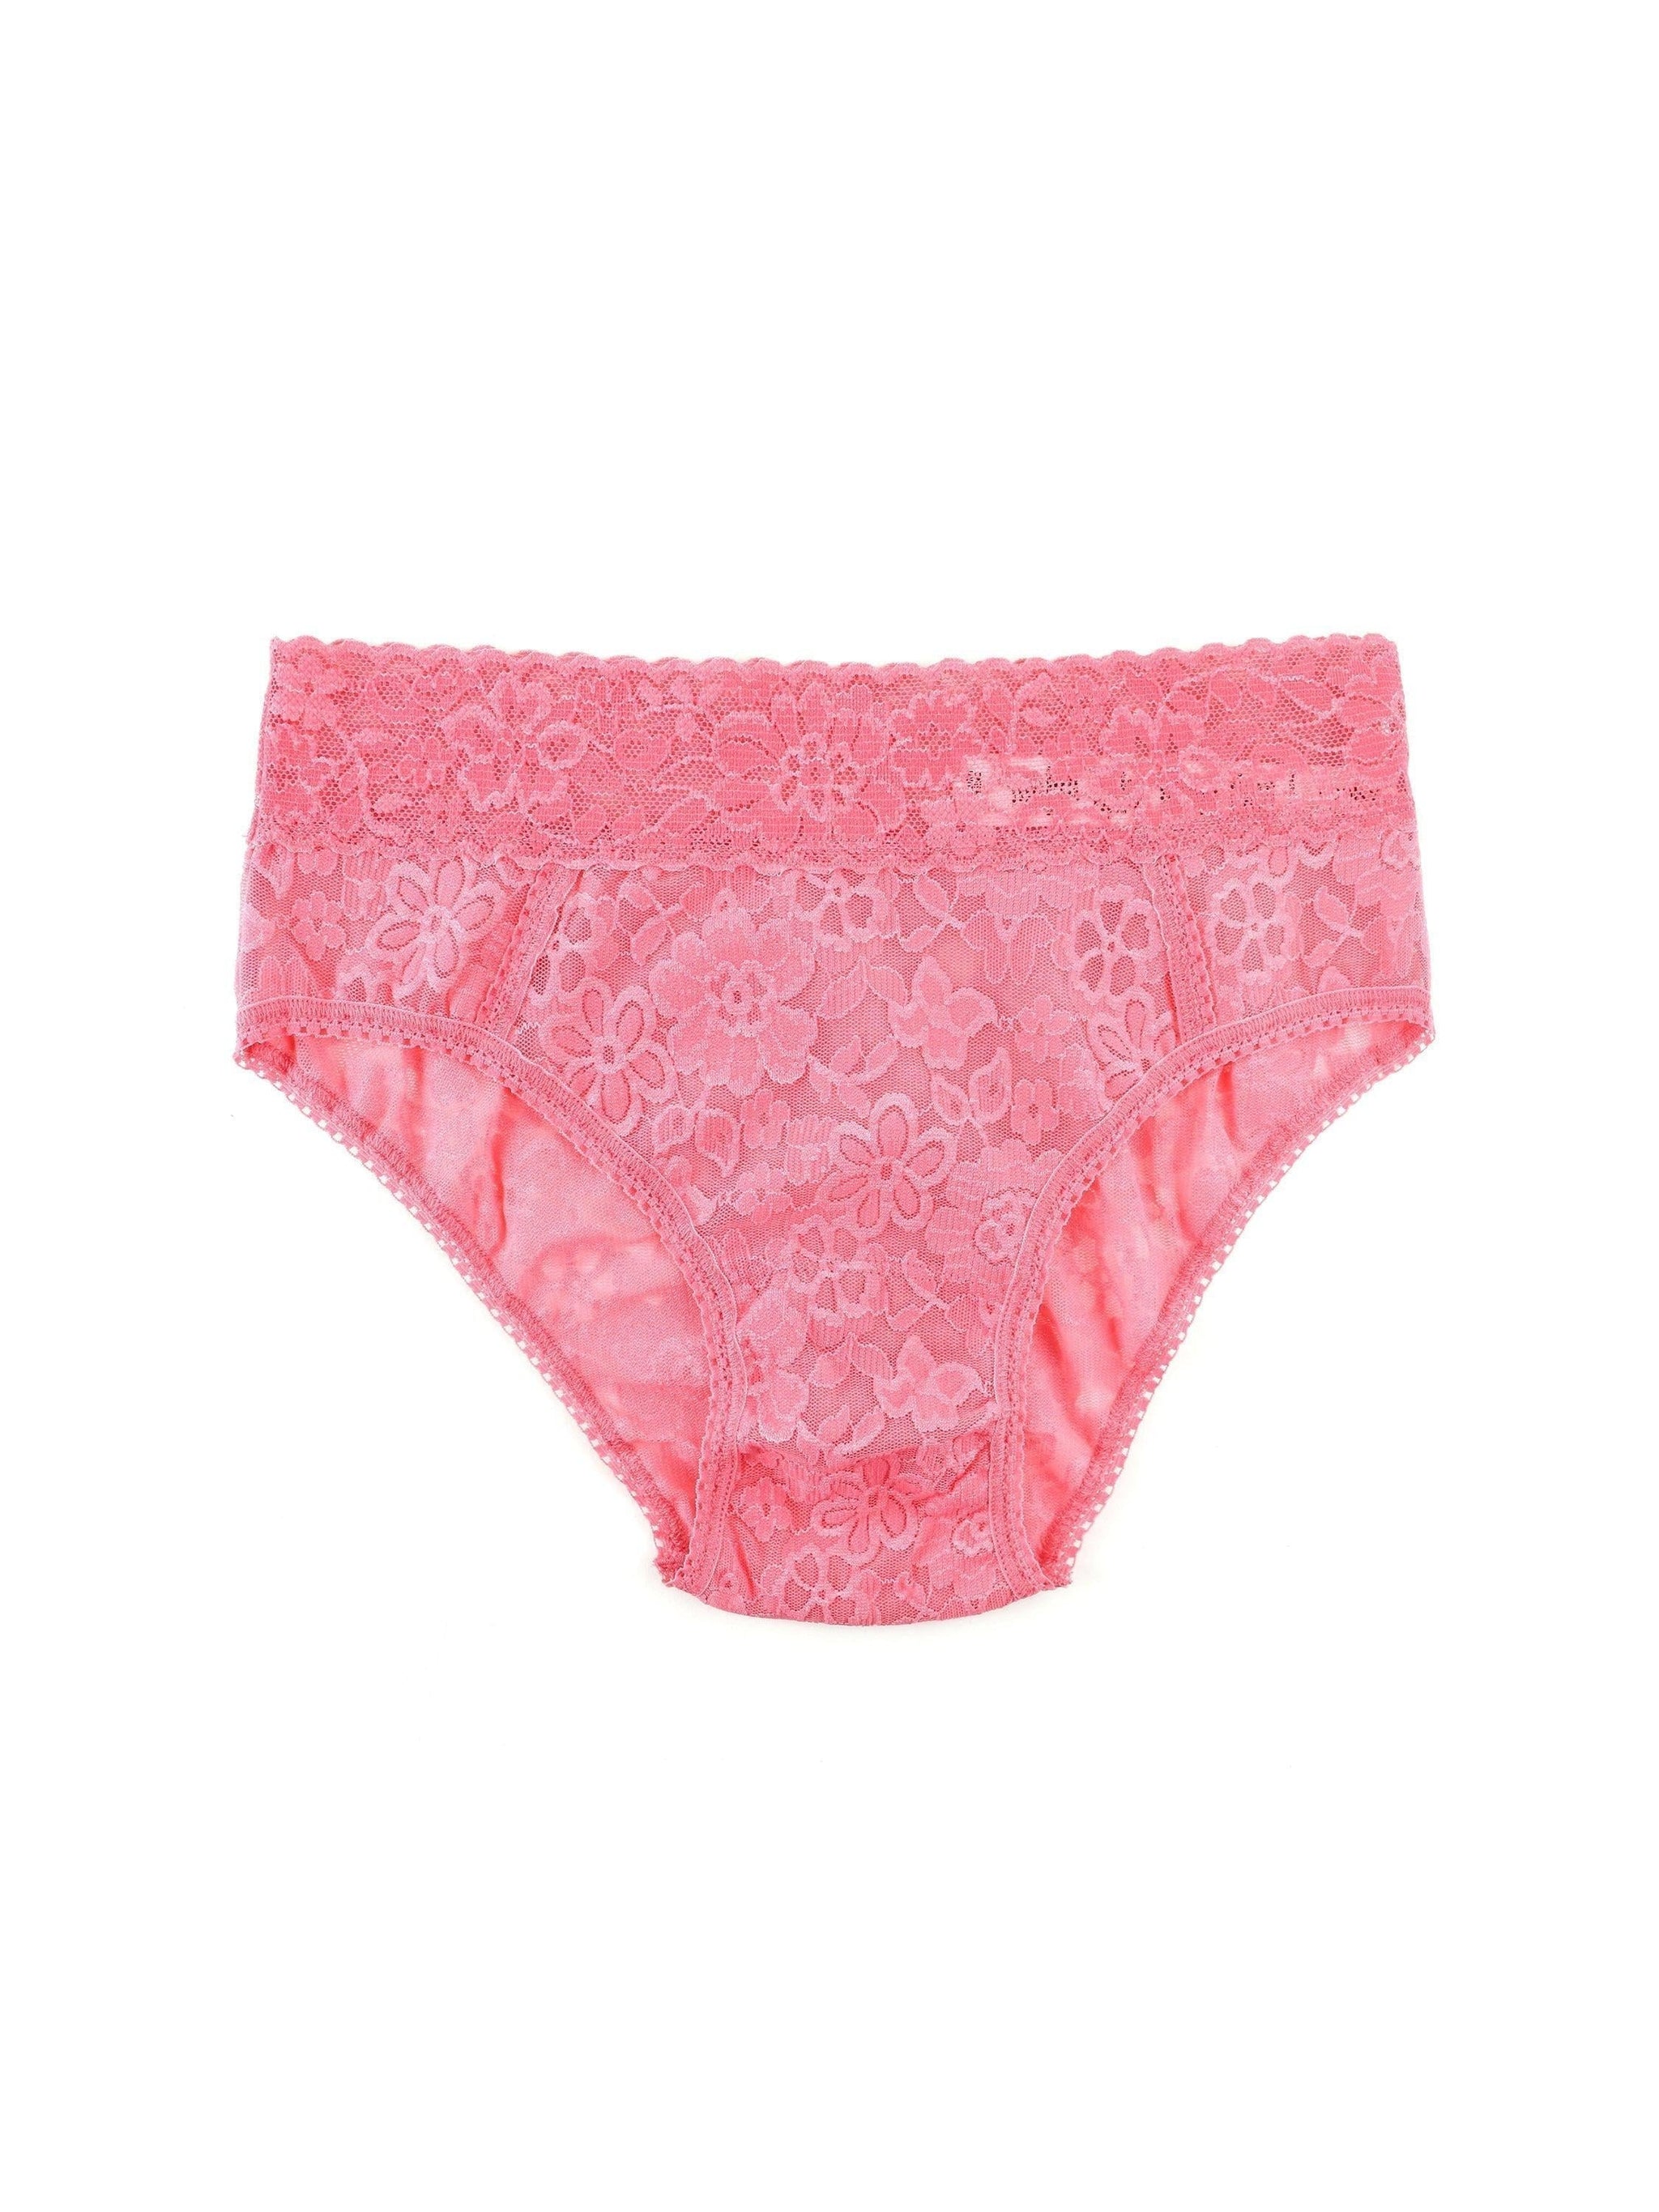 Daily Lace™ Cheeky Brief Dahlia Pink Sale